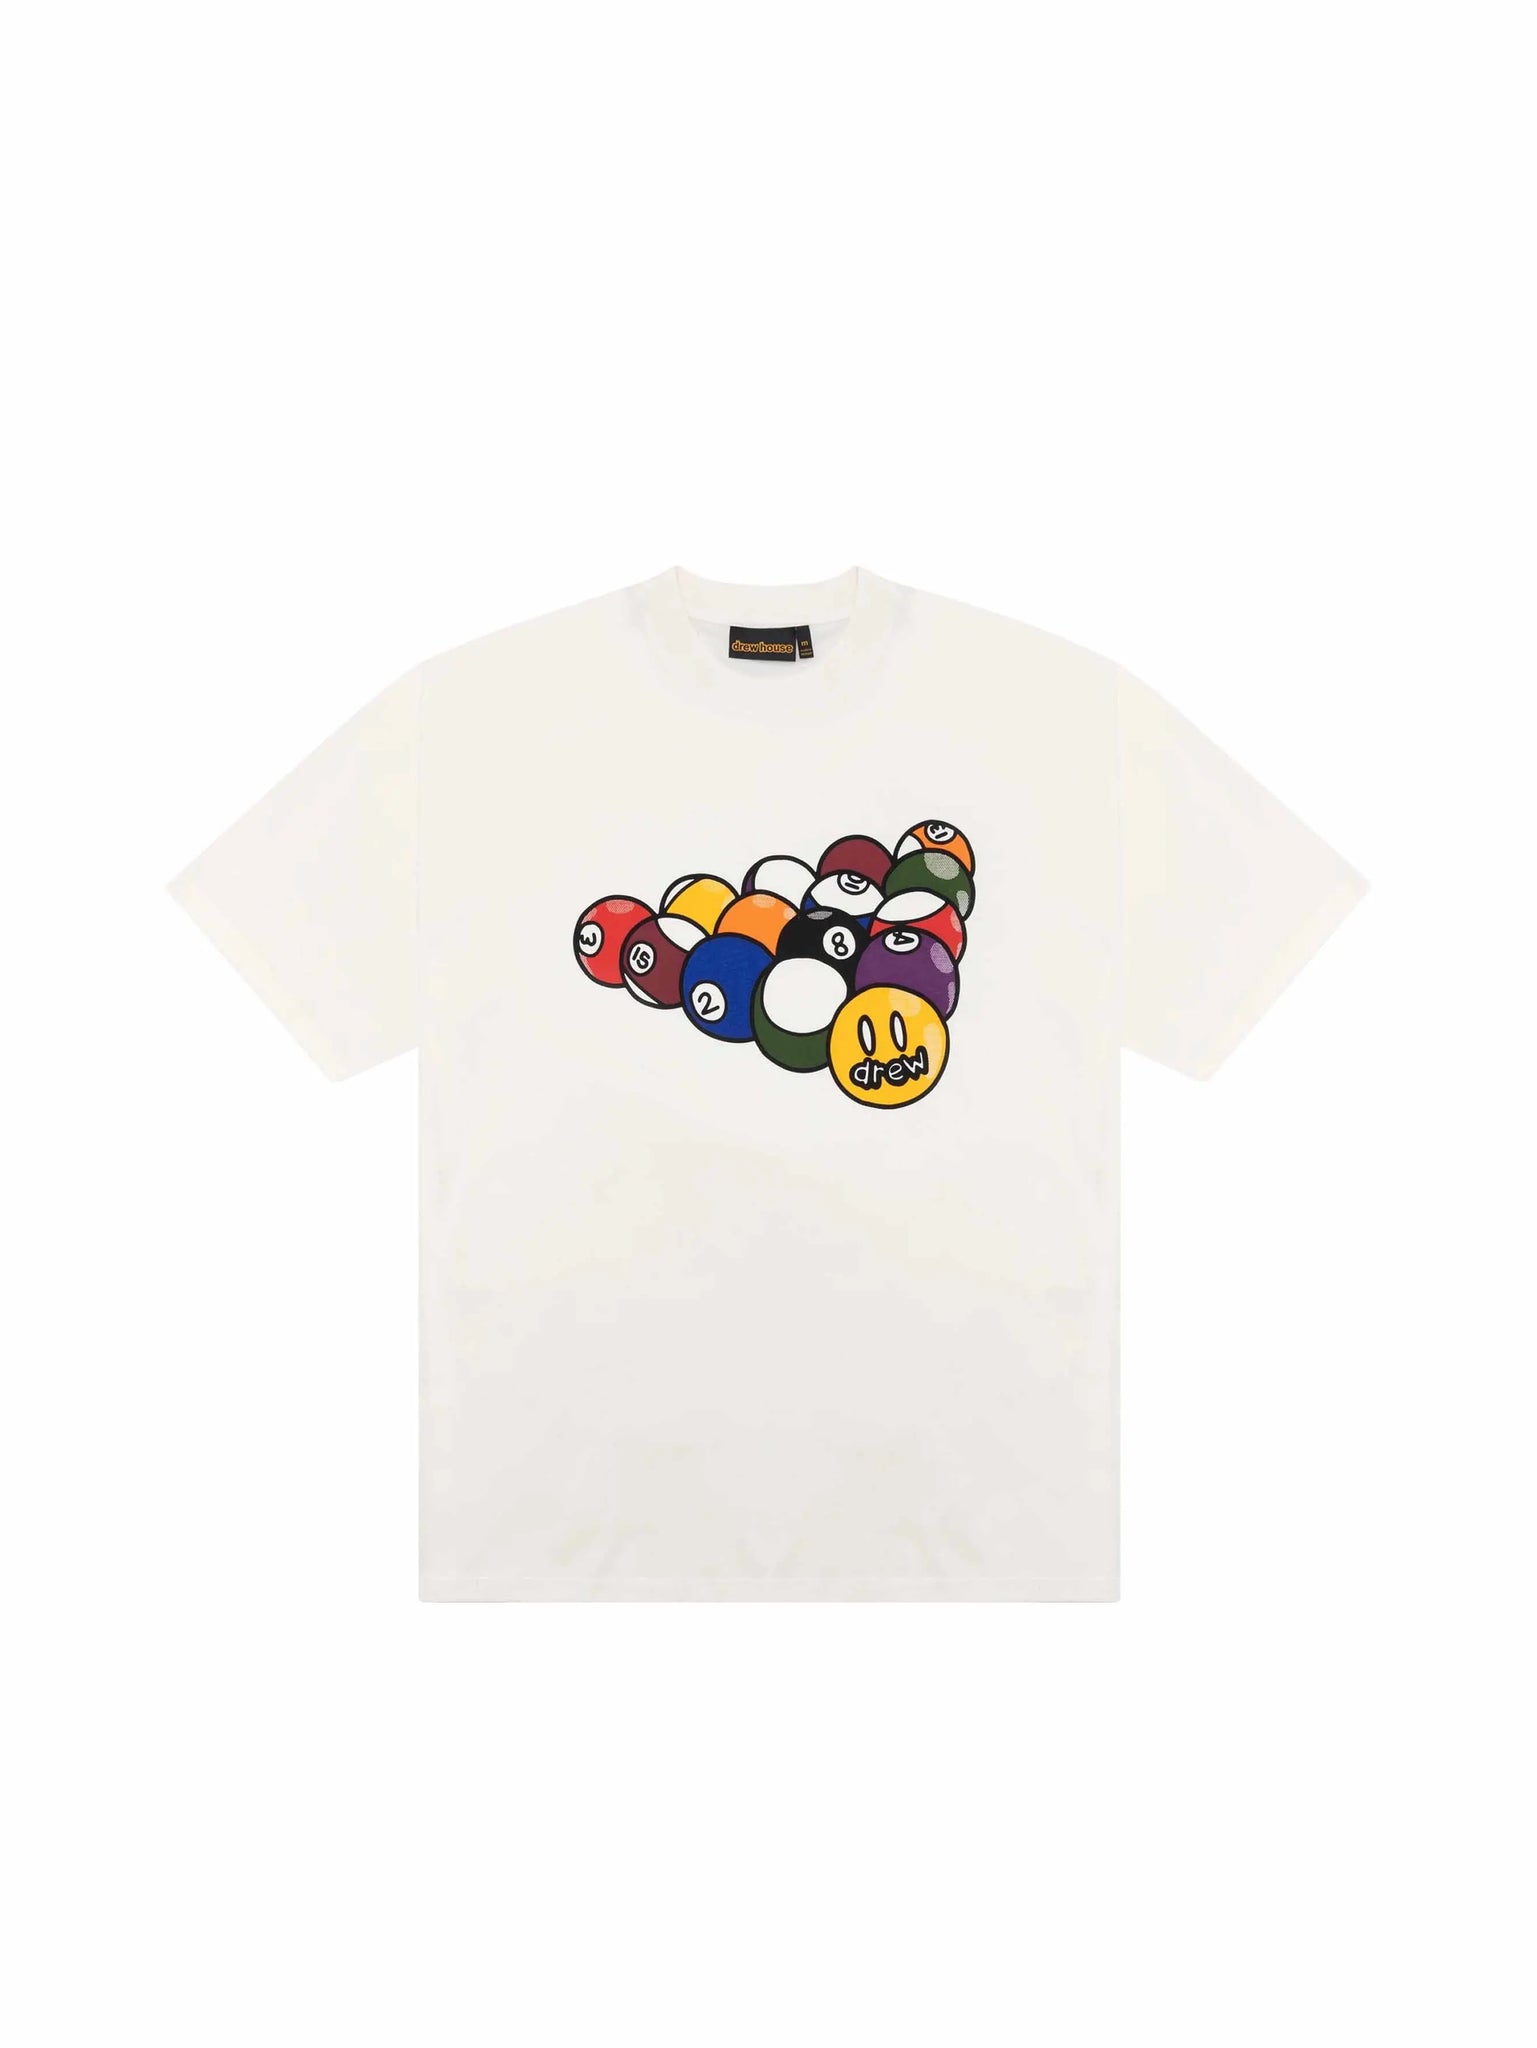 Drew House Pool Hall SS Tee Off White in Auckland, New Zealand - Shop name